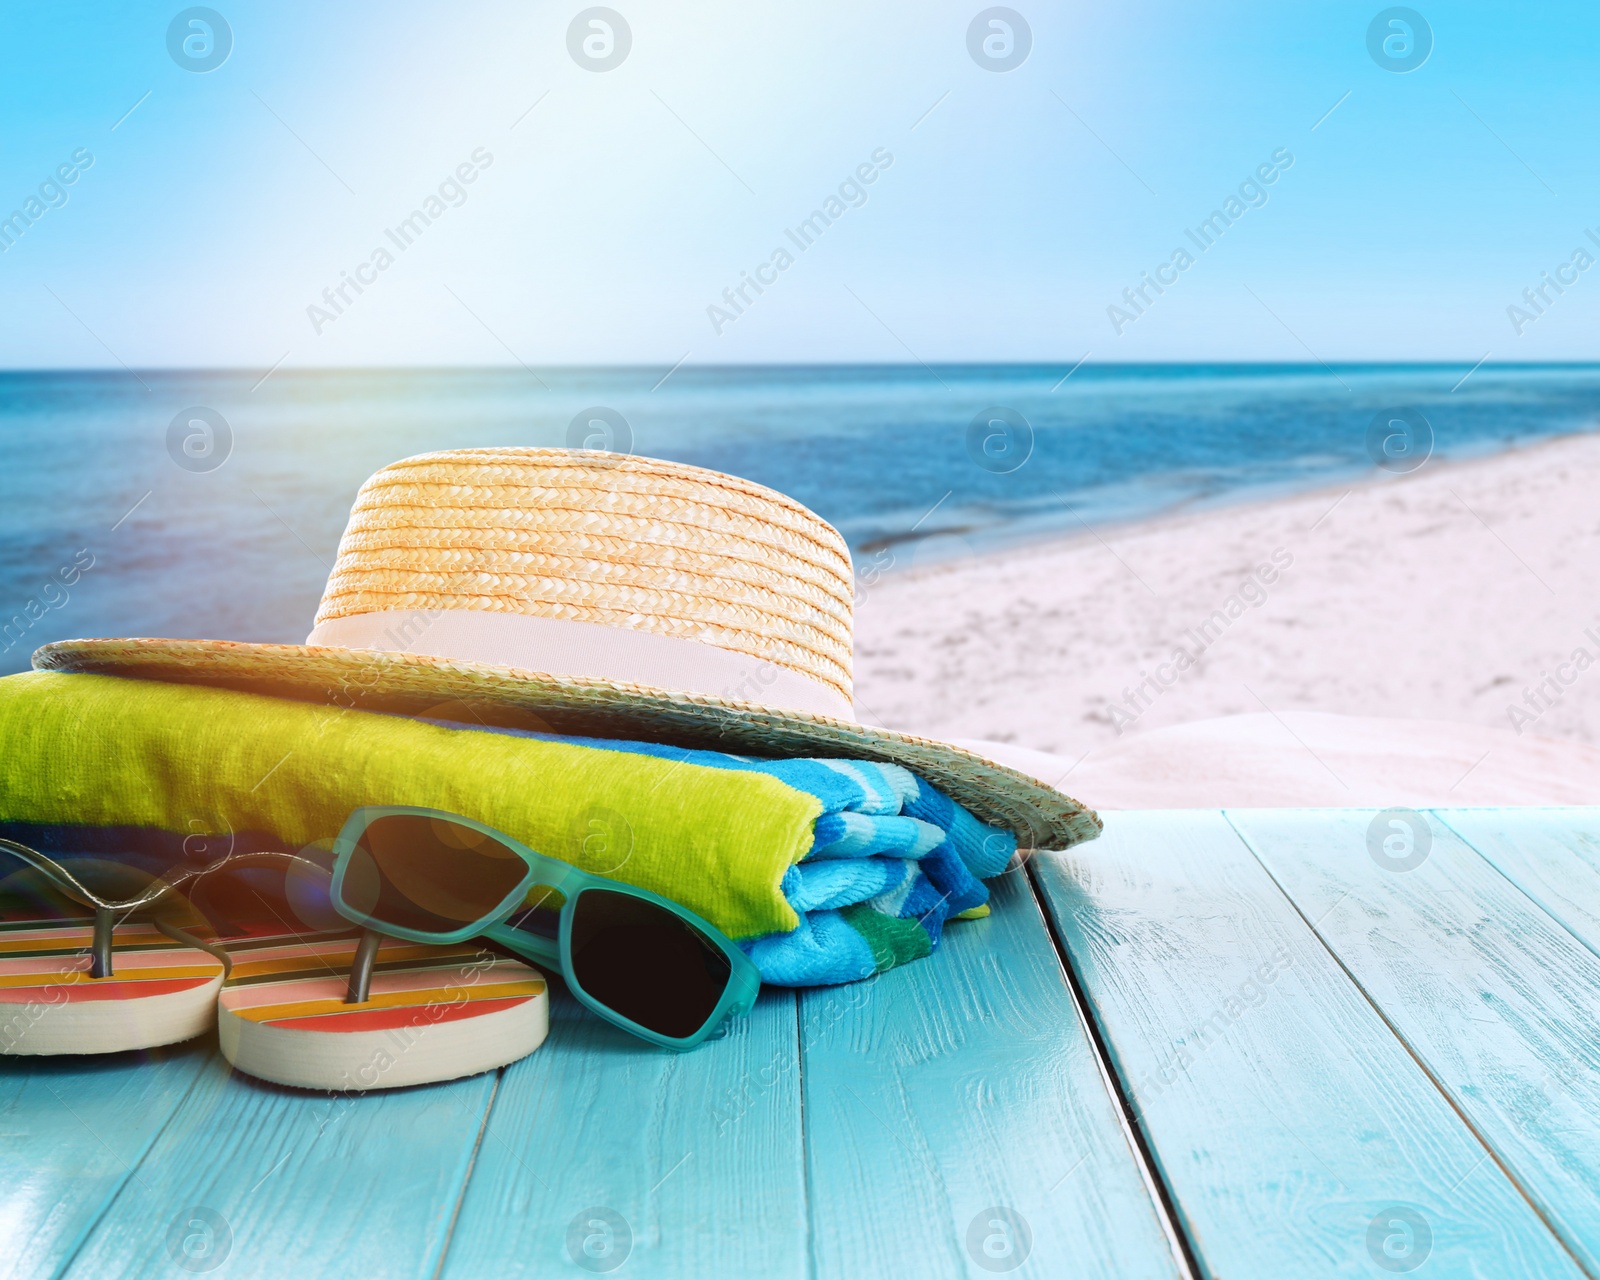 Image of Beach accessories on turquoise wooden surface near ocean 